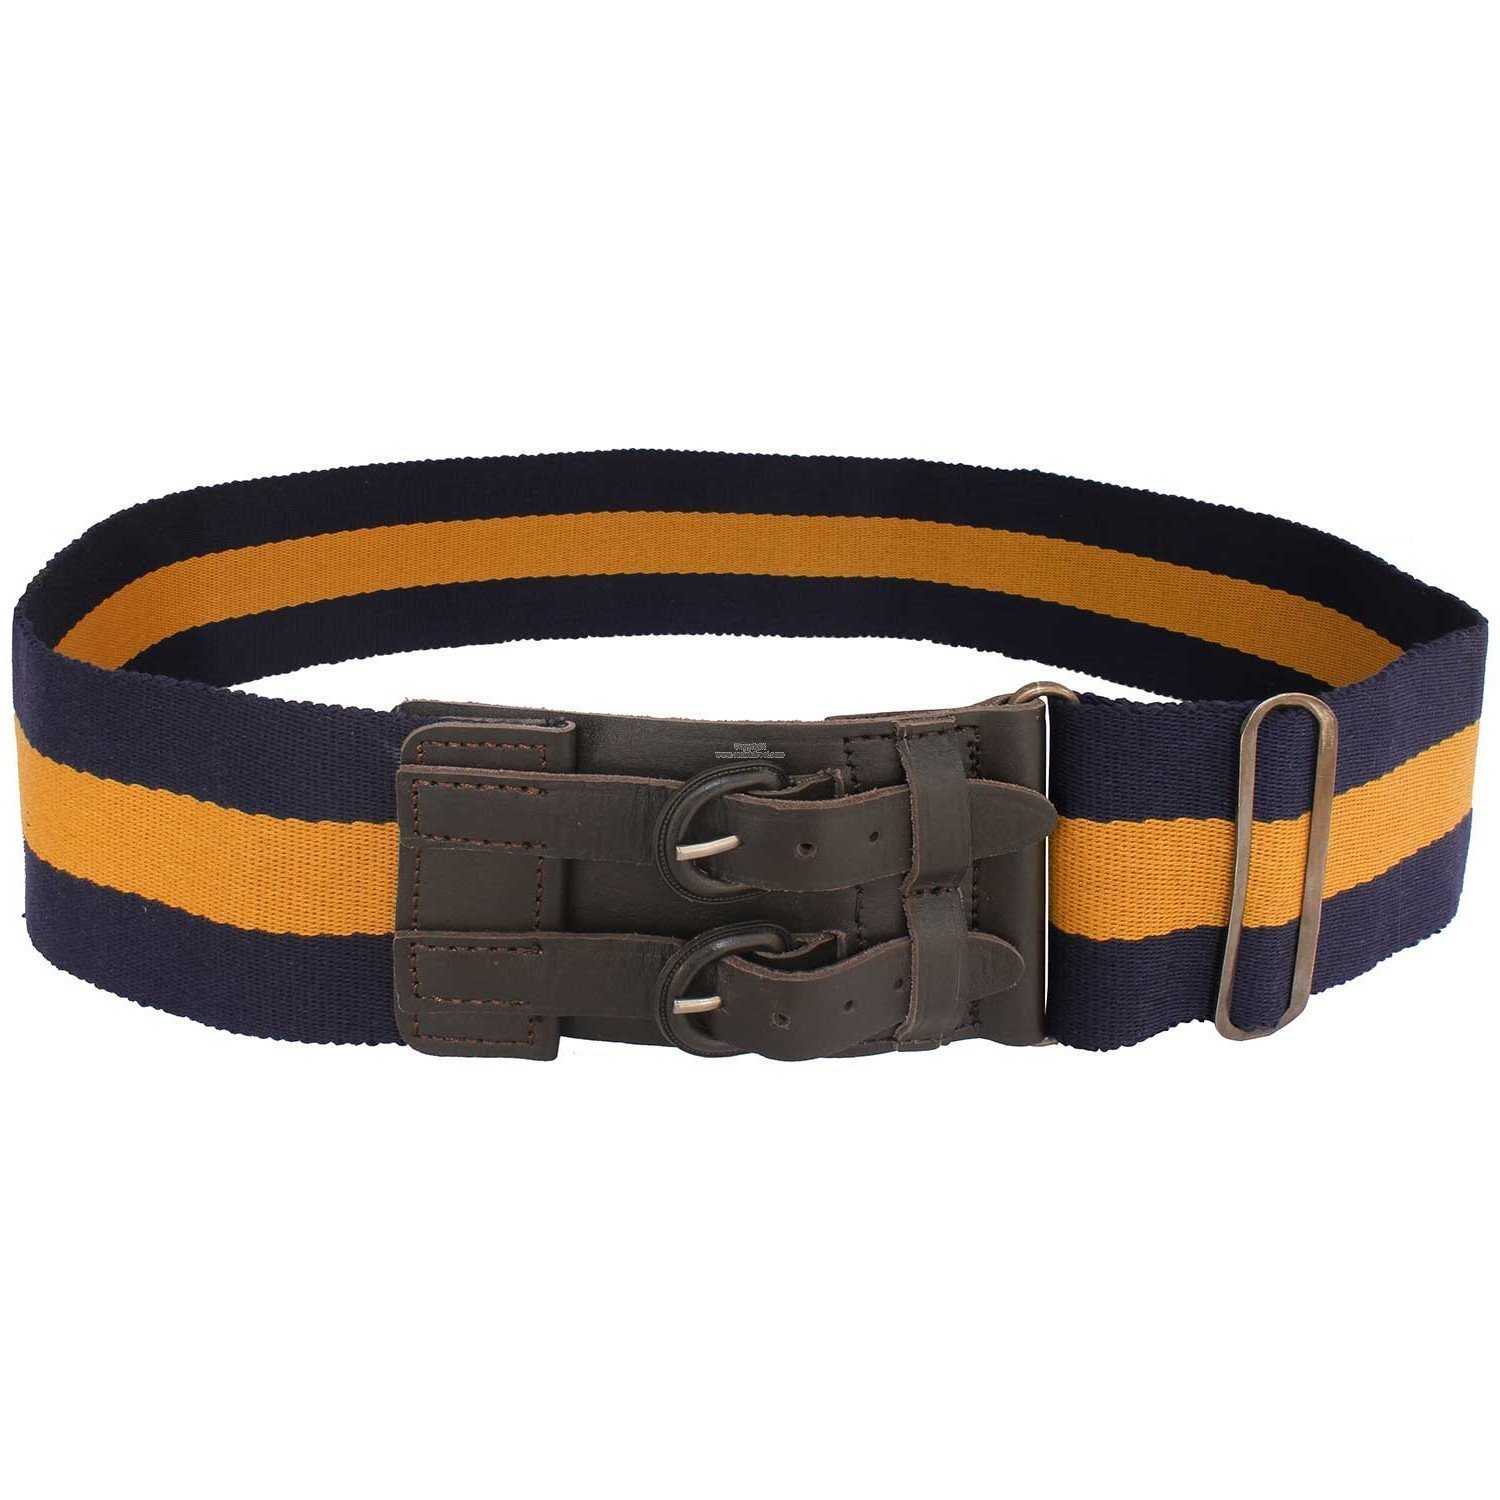 British Army Genuine Stable Belts - Princess of Wales Royal Regiment